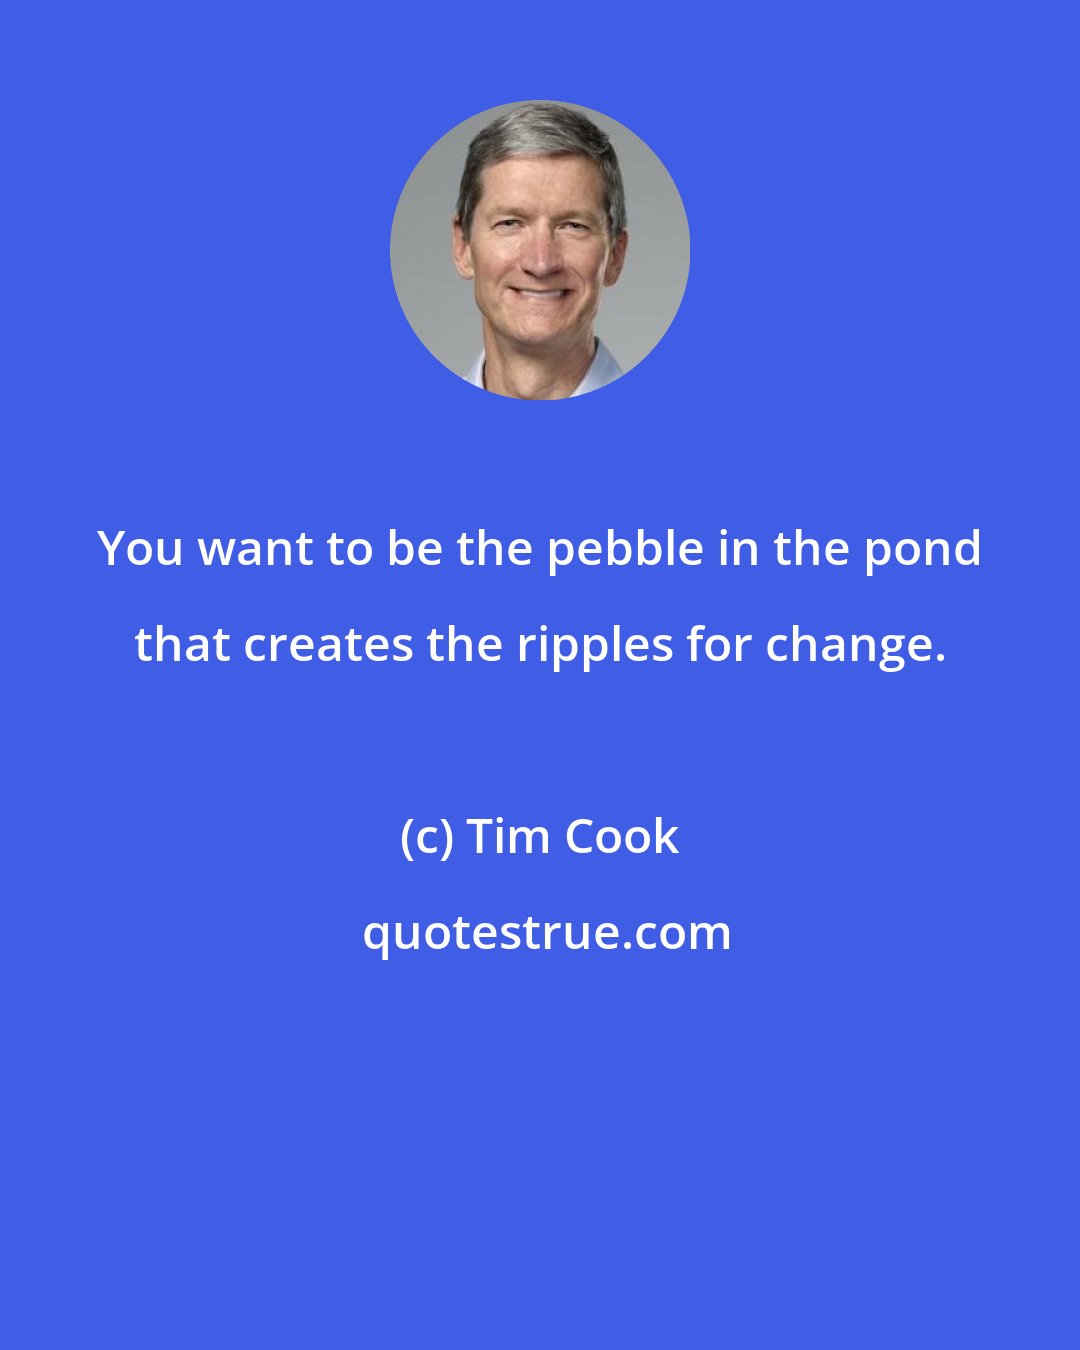 Tim Cook: You want to be the pebble in the pond that creates the ripples for change.